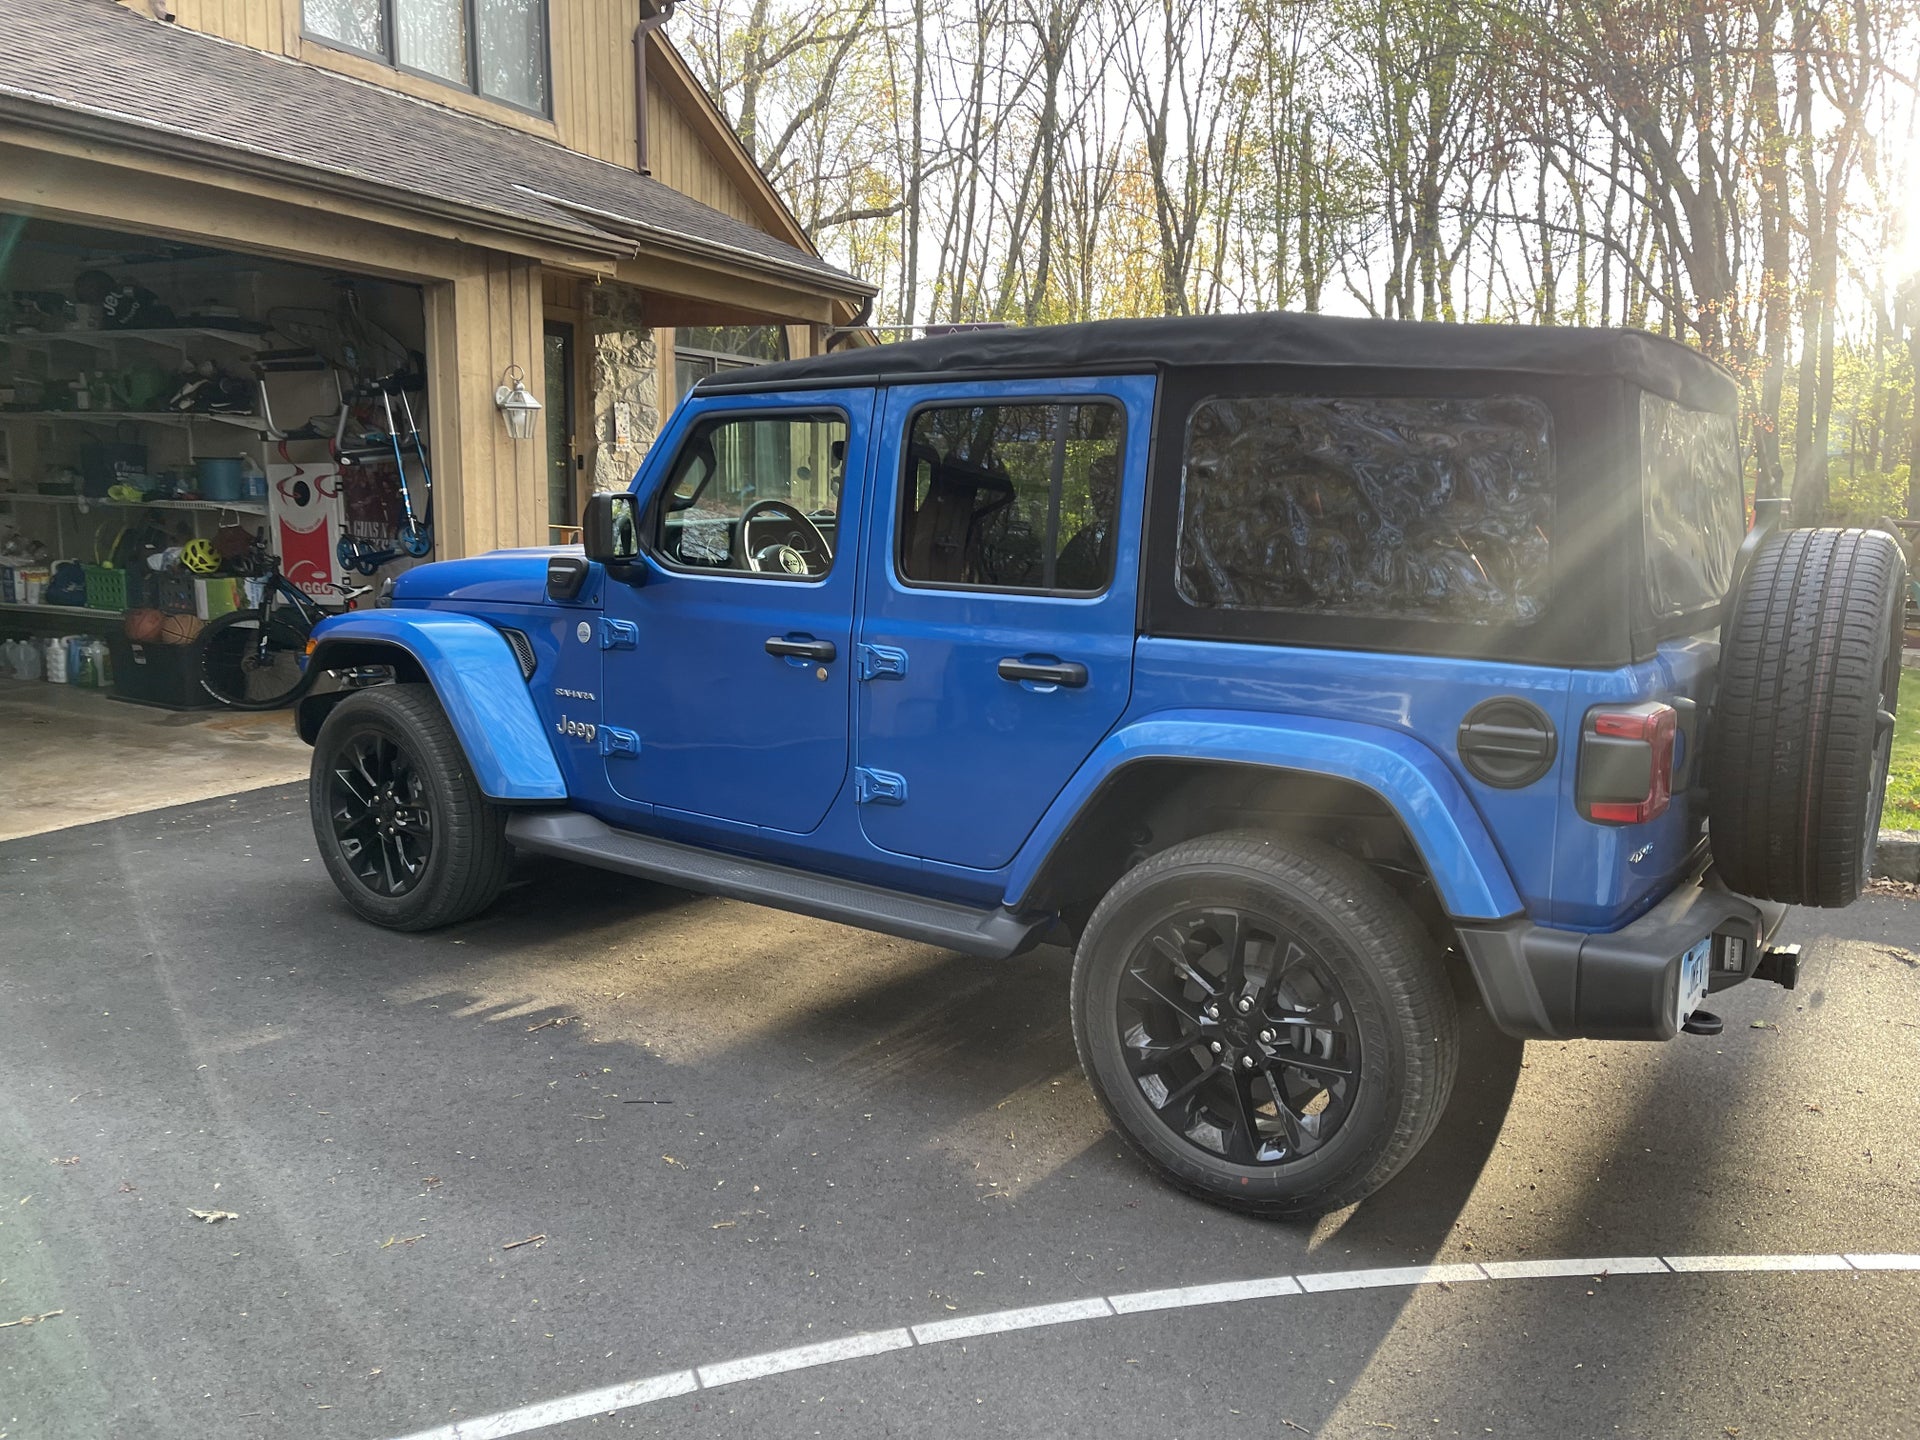 Hydro Blue Jeep Wrangler 4xe Owners Picture Thread | Jeep Wrangler 4xe Forum